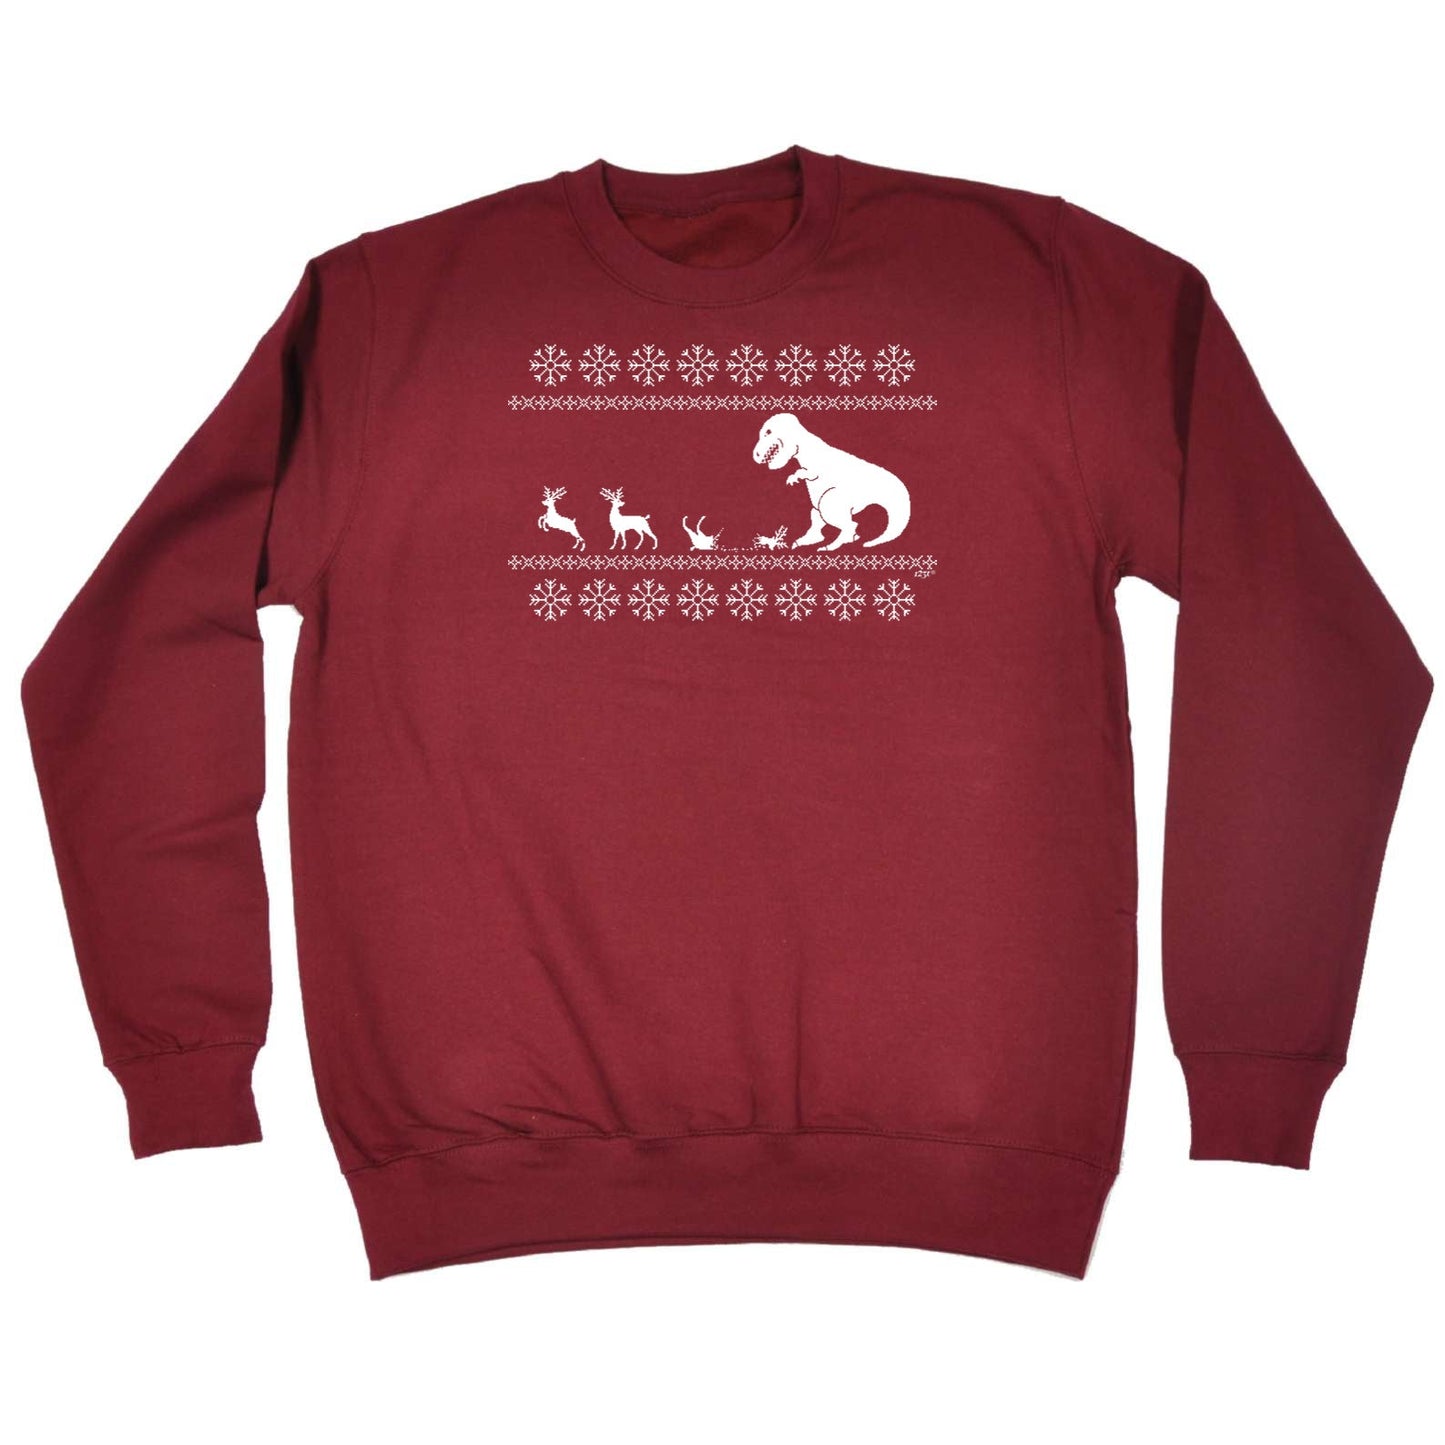 Christmas Lunch For Trex Jumper - Funny Sweatshirt